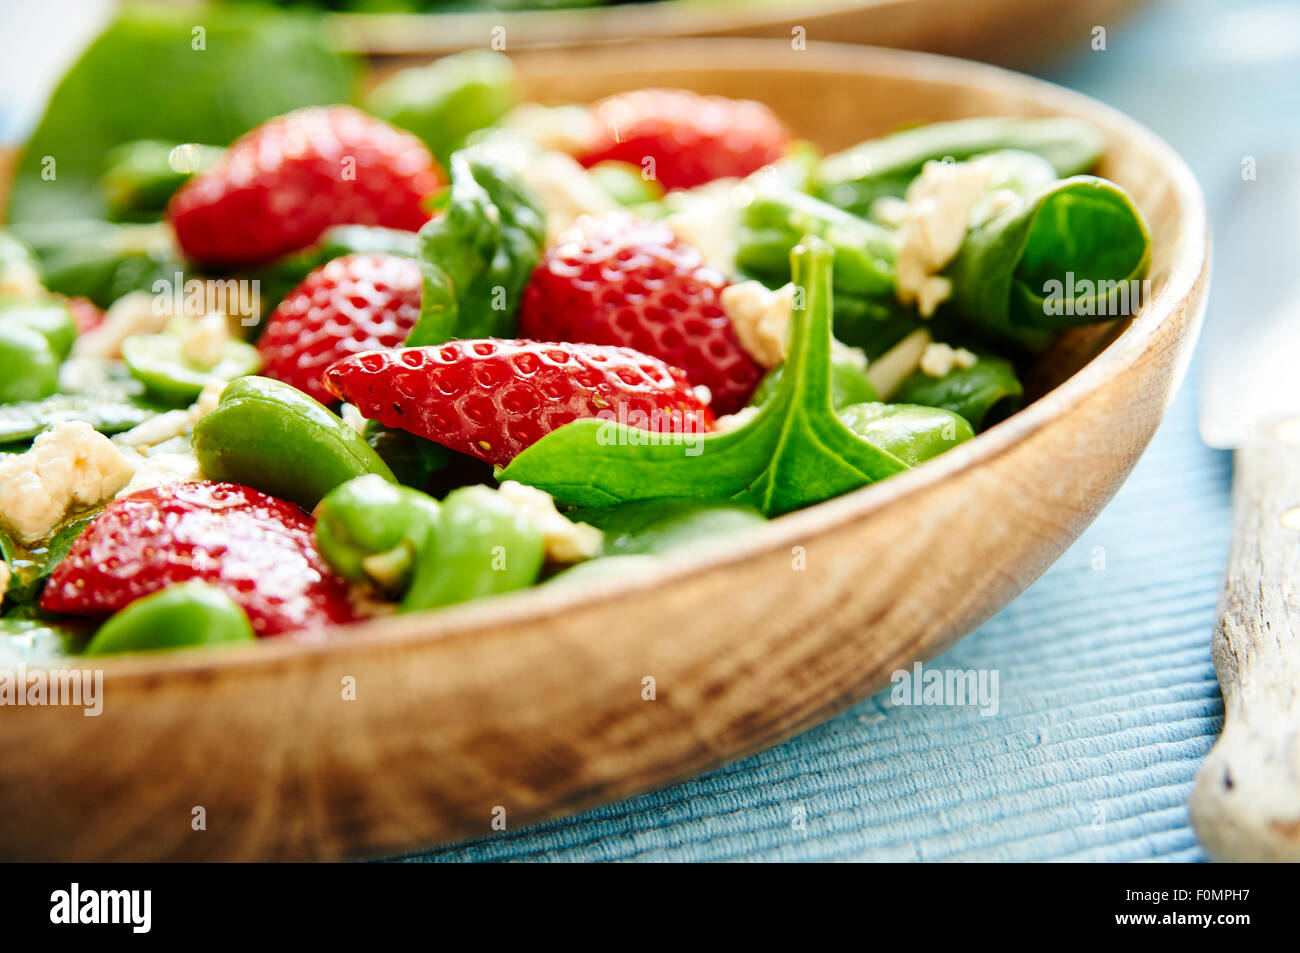 Fava bean, spinach and strawberry salad Stock Photo